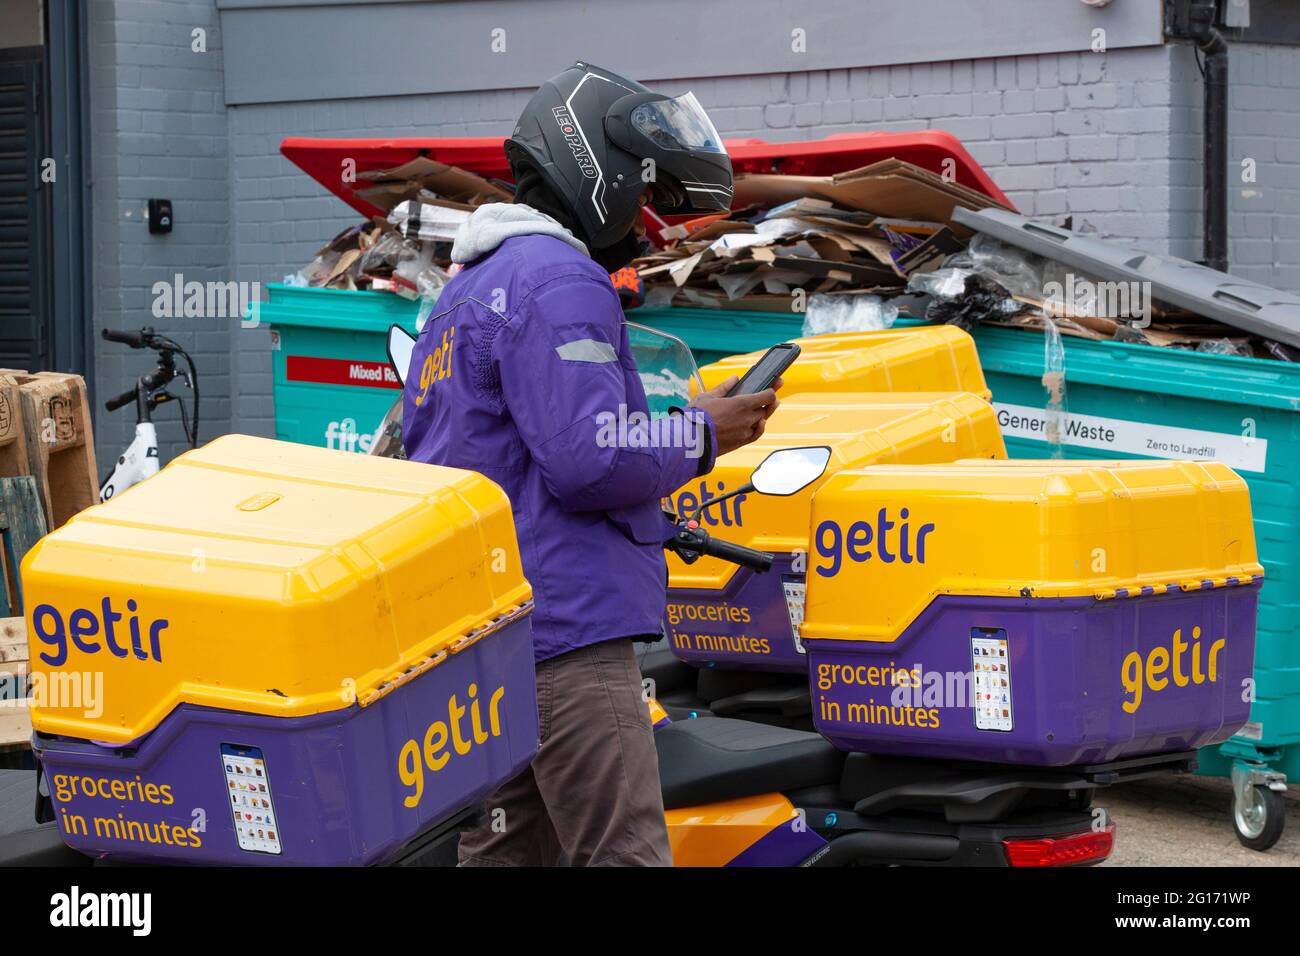 London, UK, 5 June 2021: on a Saturday lunchtime Getir is busy sending out grocery deliveries on electric mopeds from a 'dark shop' on a light industrial estate strategically positioned between Clapham, Balham and Streatham. The Turkish company has recently raised $550 million (£388m) to expand into France, Germany and the USA. Anna Watson/Alamy Live News Stock Photo